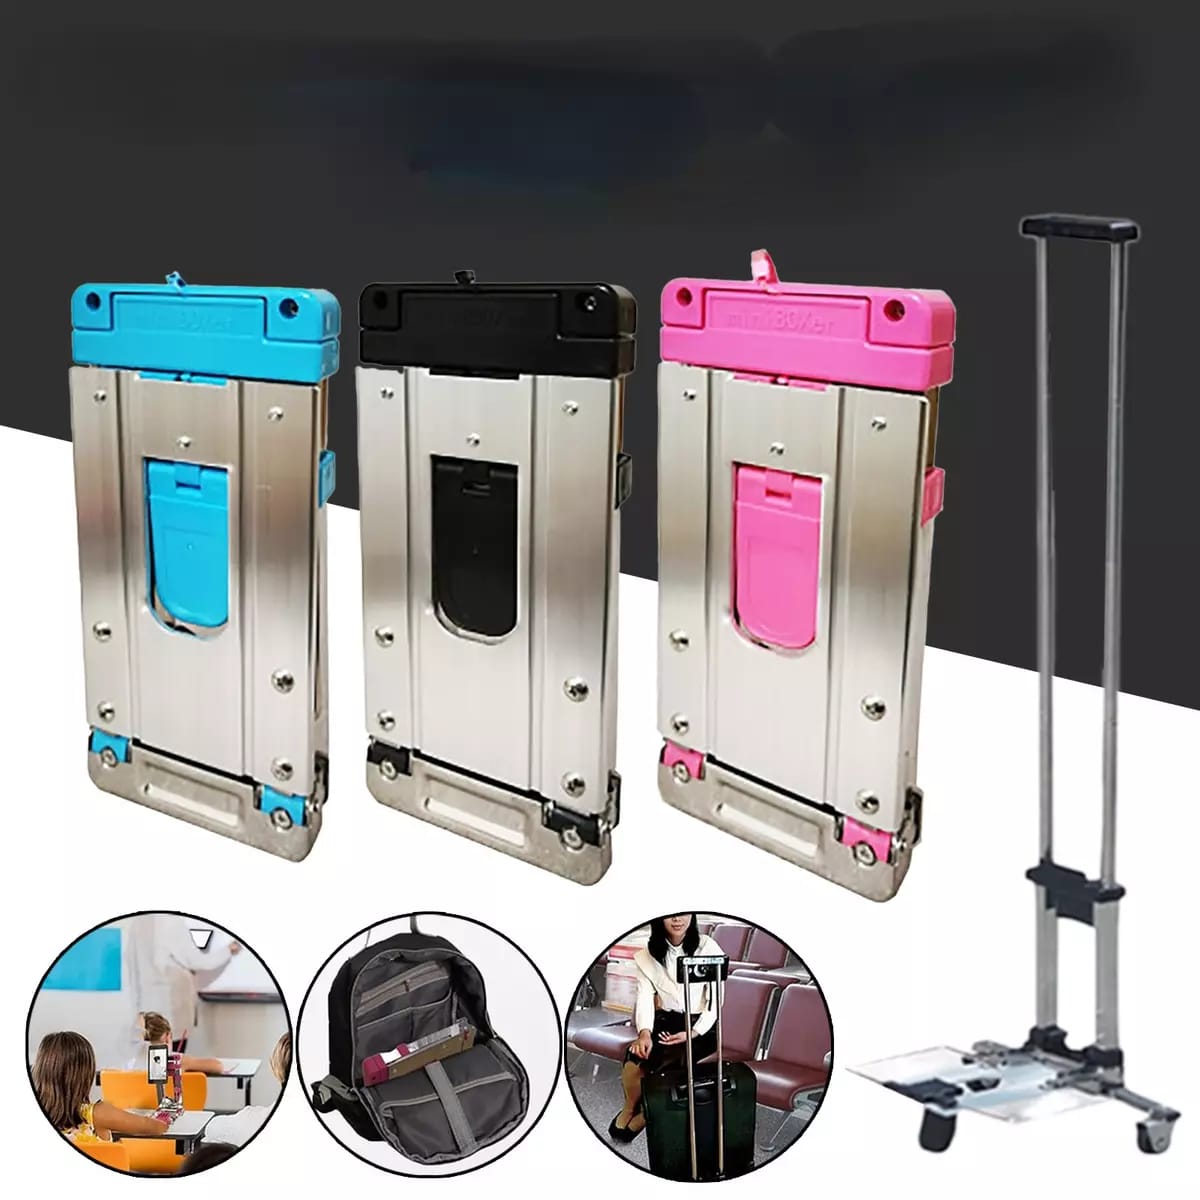 3 Colors of Stainless Steel Luggage Carrier.